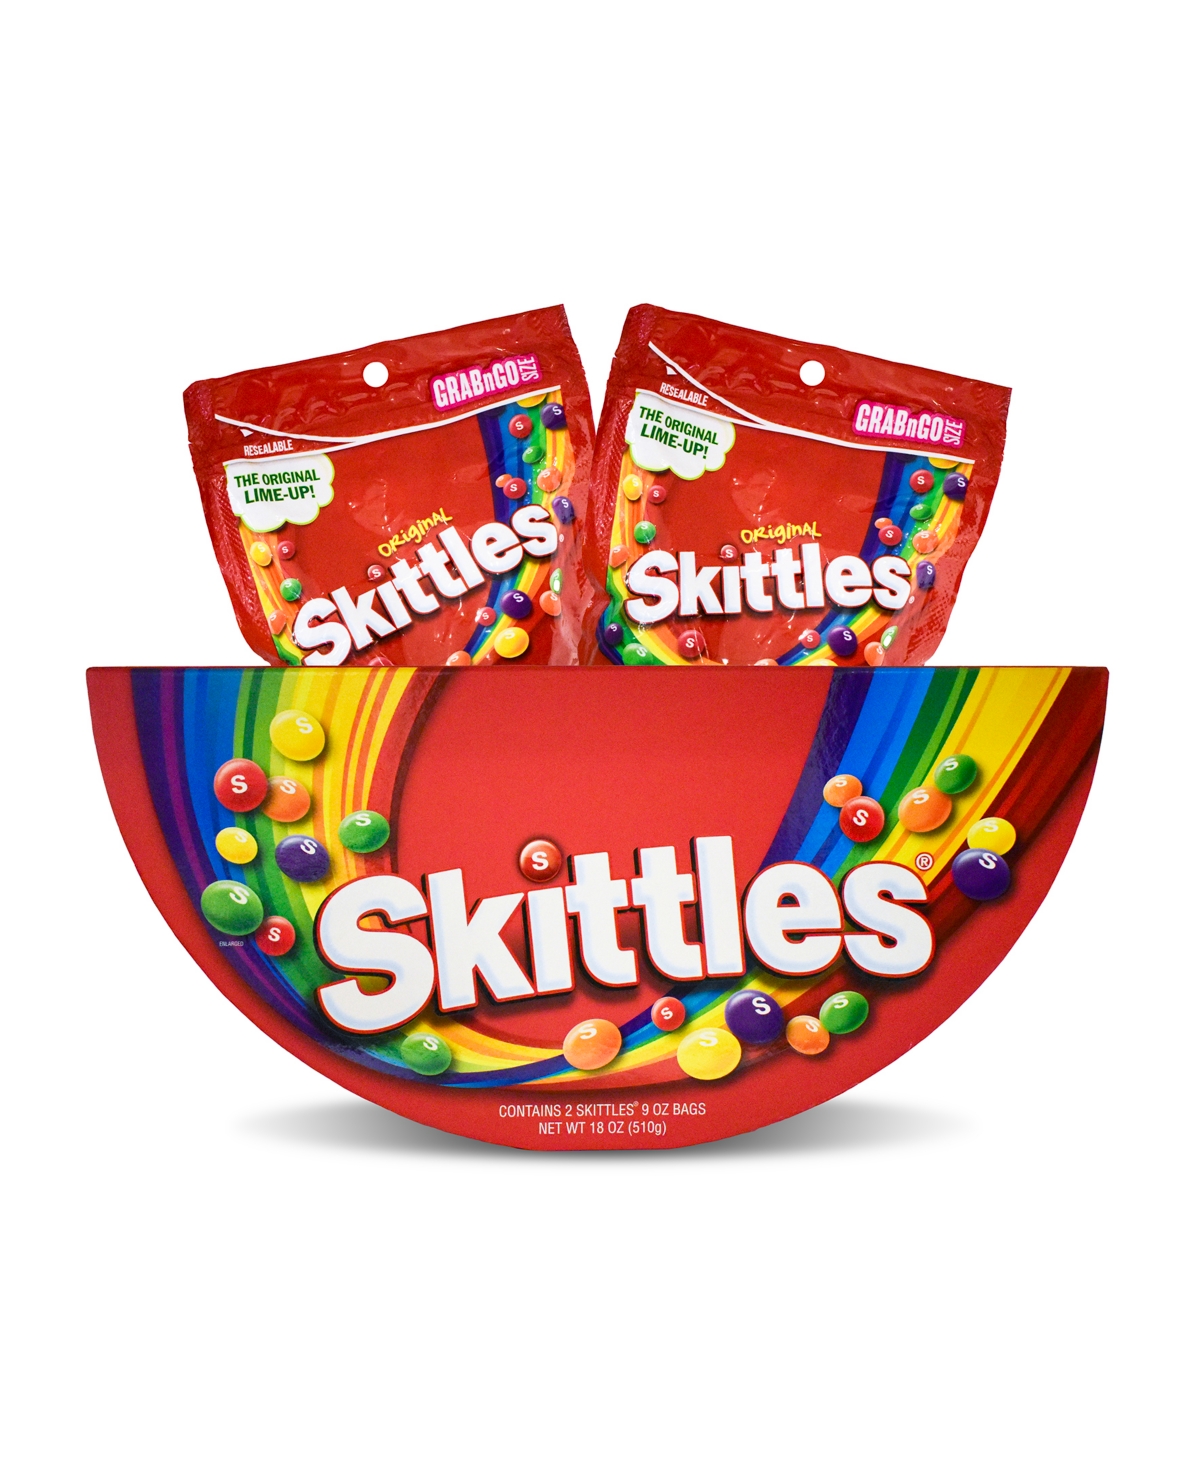 It'sugar Giant Skittles Candy Gift Box In No Color